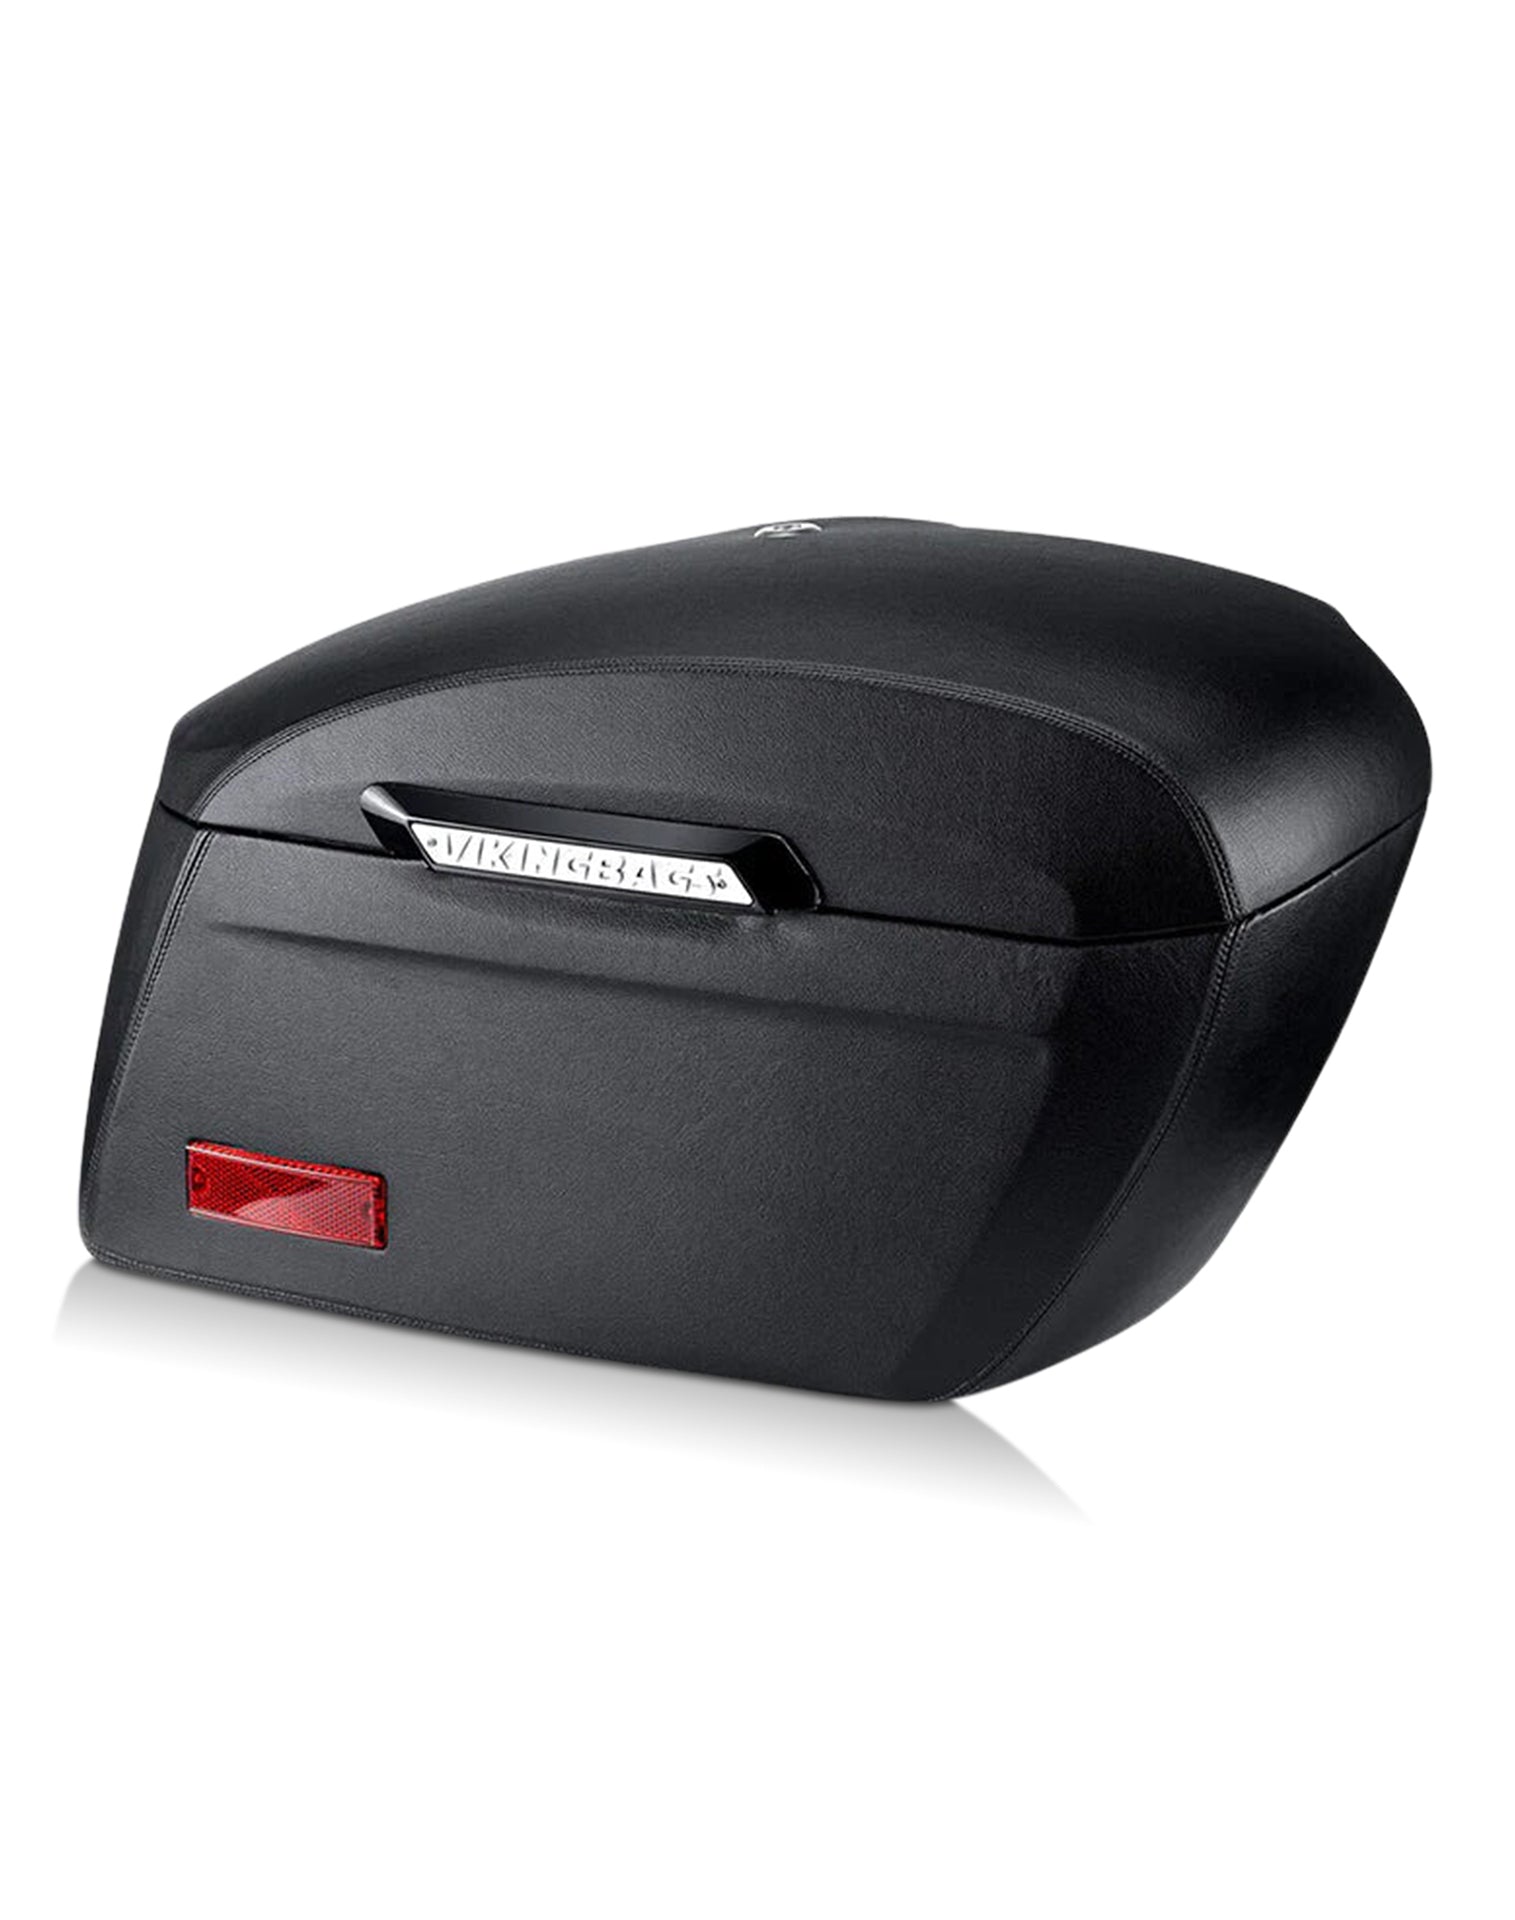 38L Lamellar Vale Extra Large Shock Cut-out Honda VTX 1300 R (Retro) Leather Covered Motorcycle Hard Saddlebags Main View